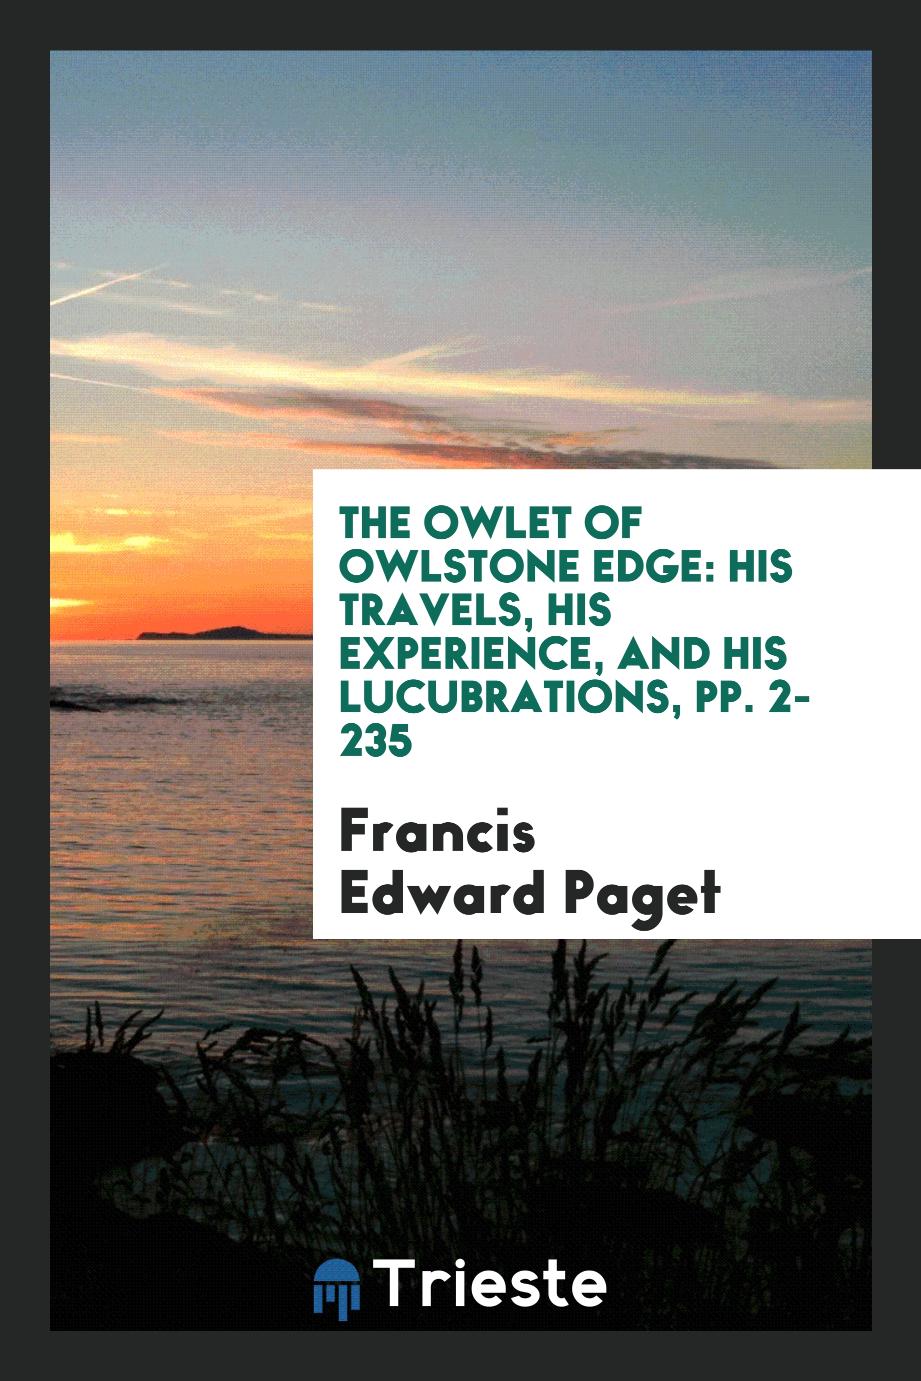 The Owlet of Owlstone Edge: His Travels, His Experience, and His Lucubrations, pp. 2-235